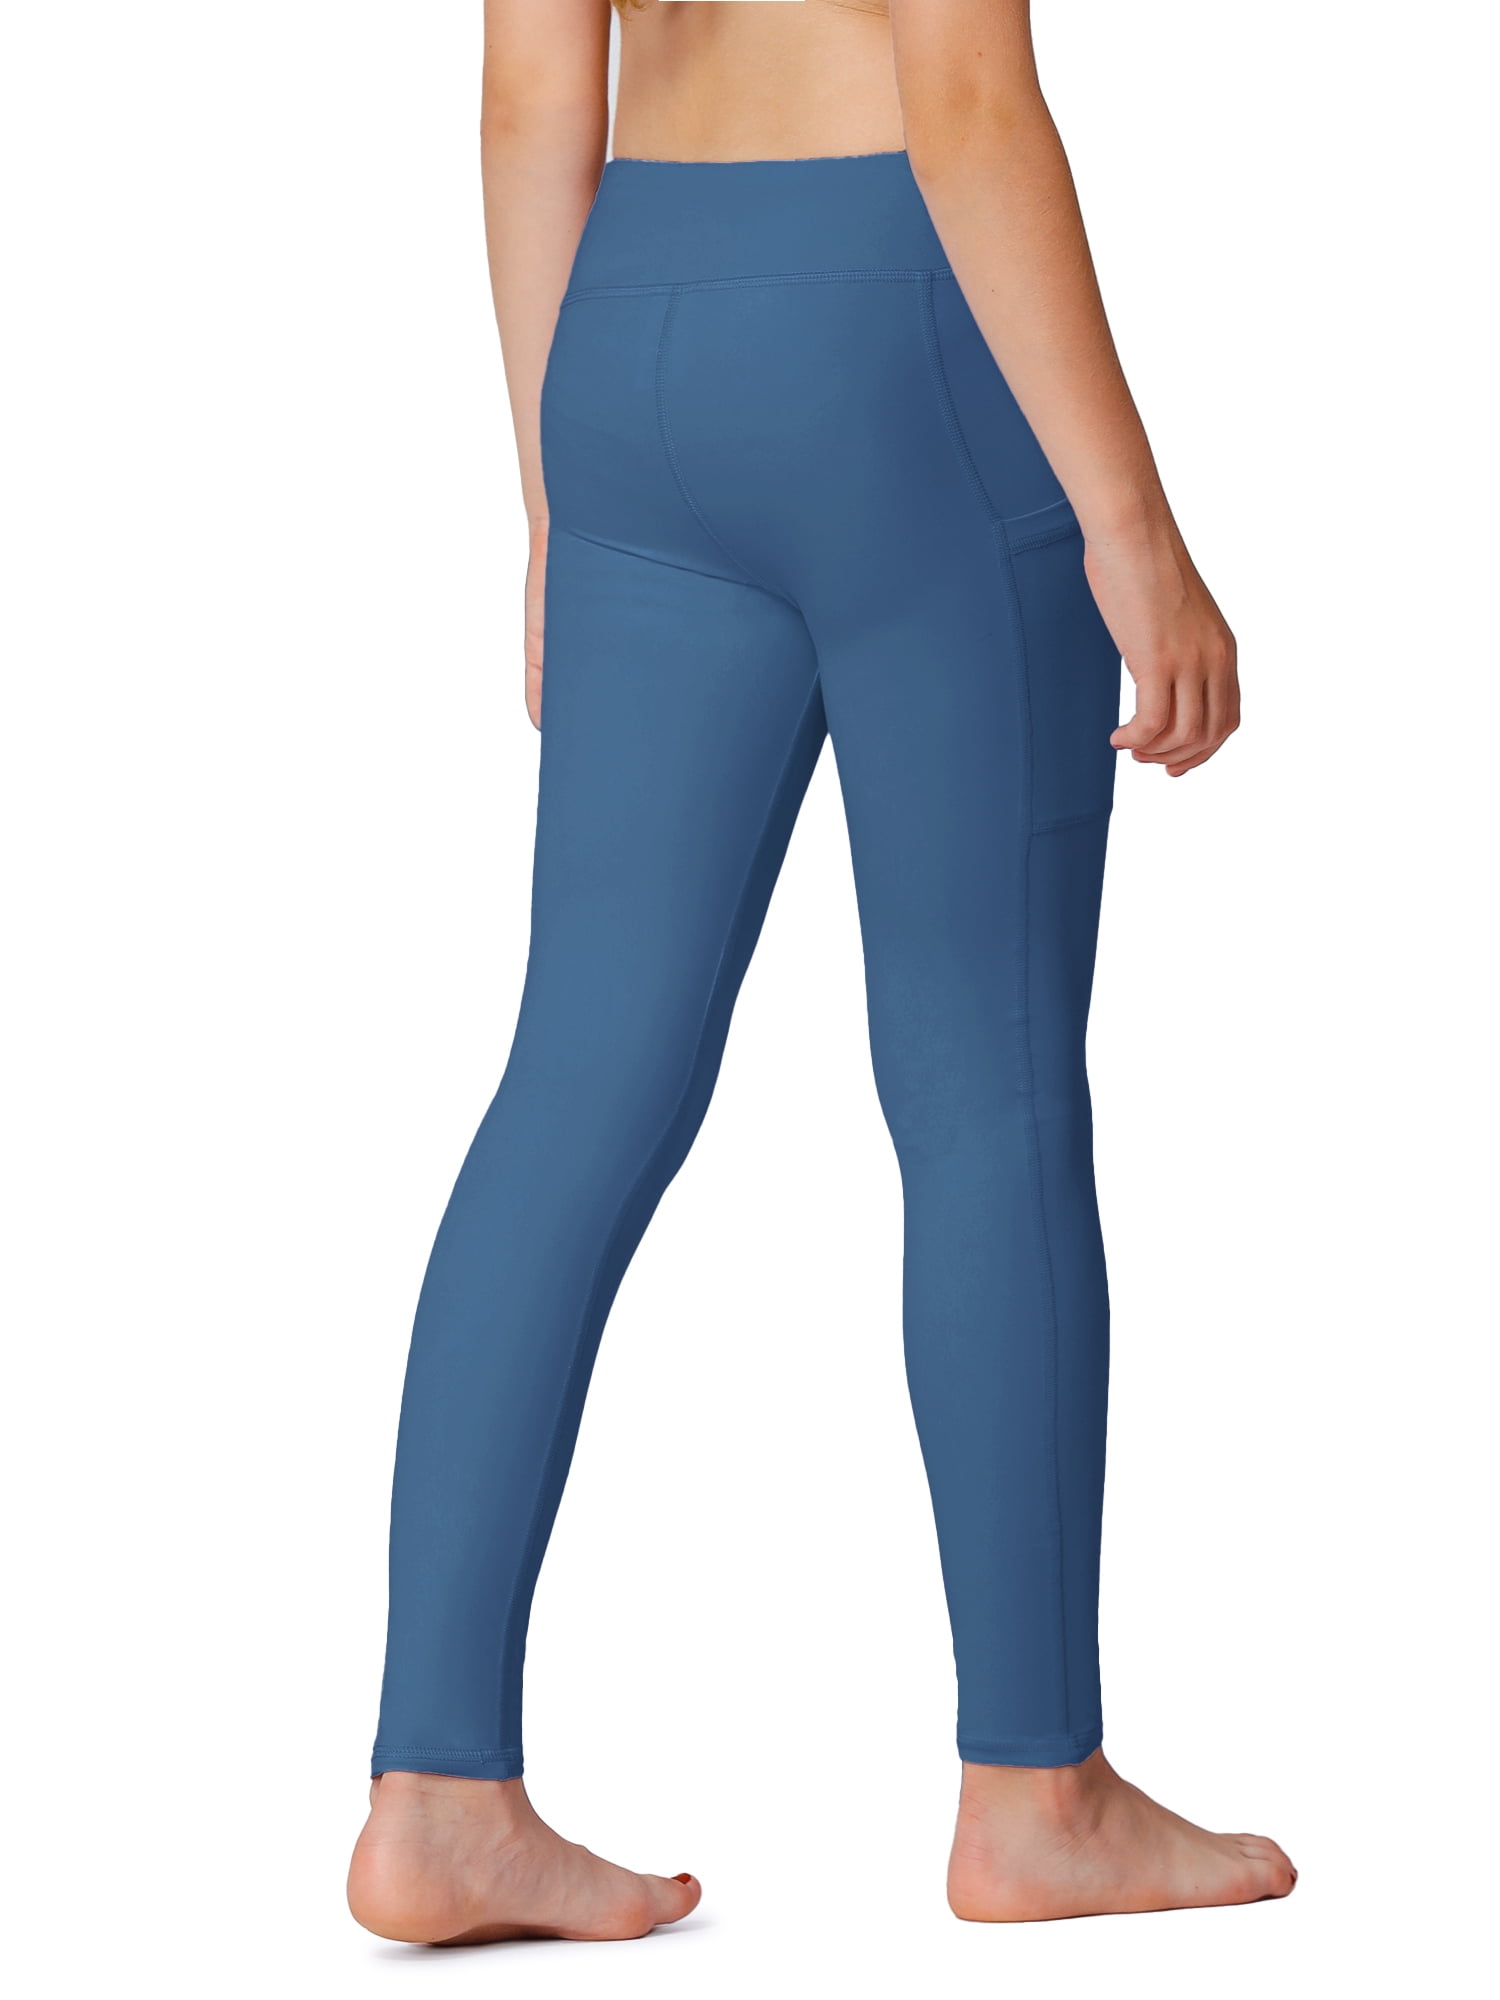 LAWOR Womens 2024 Yoga Pants, Teen Girls Flap Pocket Workout Leggings  Skinny High Waisted Running Pants Fitness Gym Pants Blue at  Women's  Clothing store